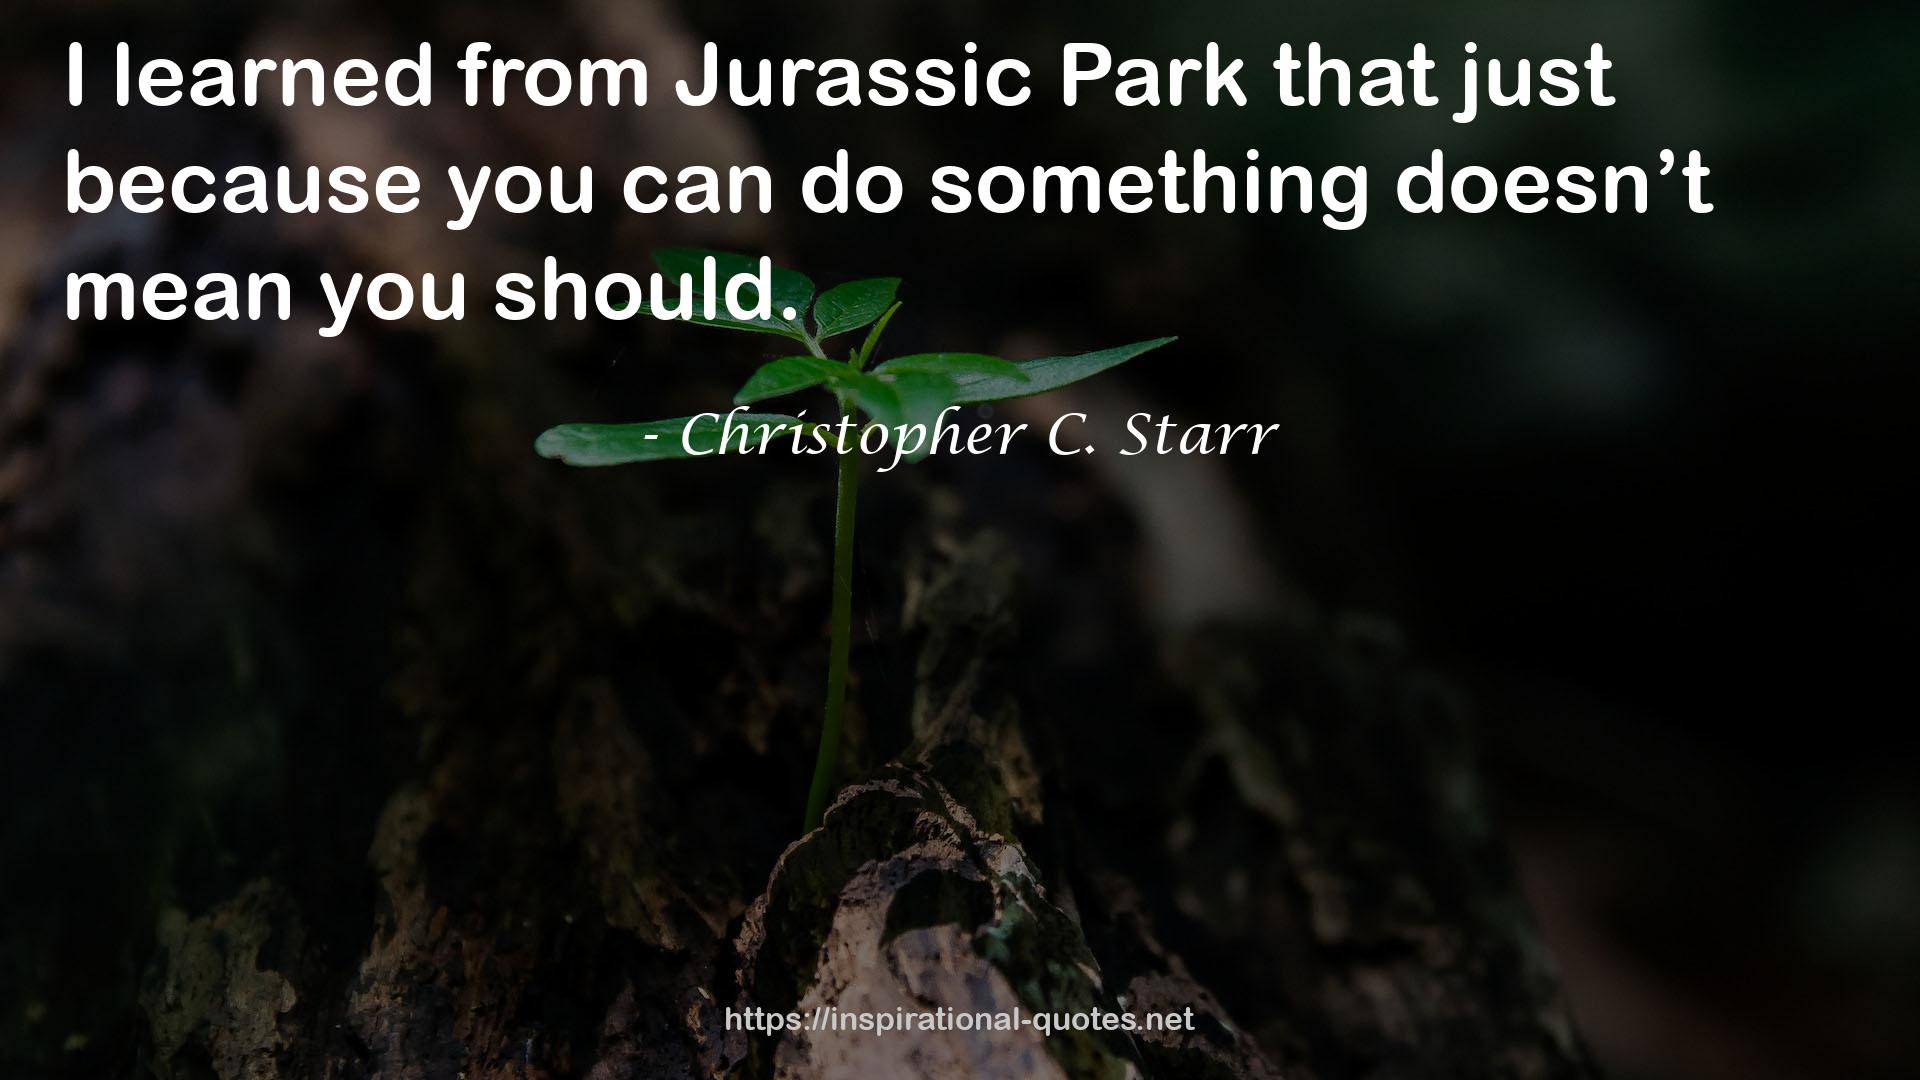 Christopher C. Starr QUOTES